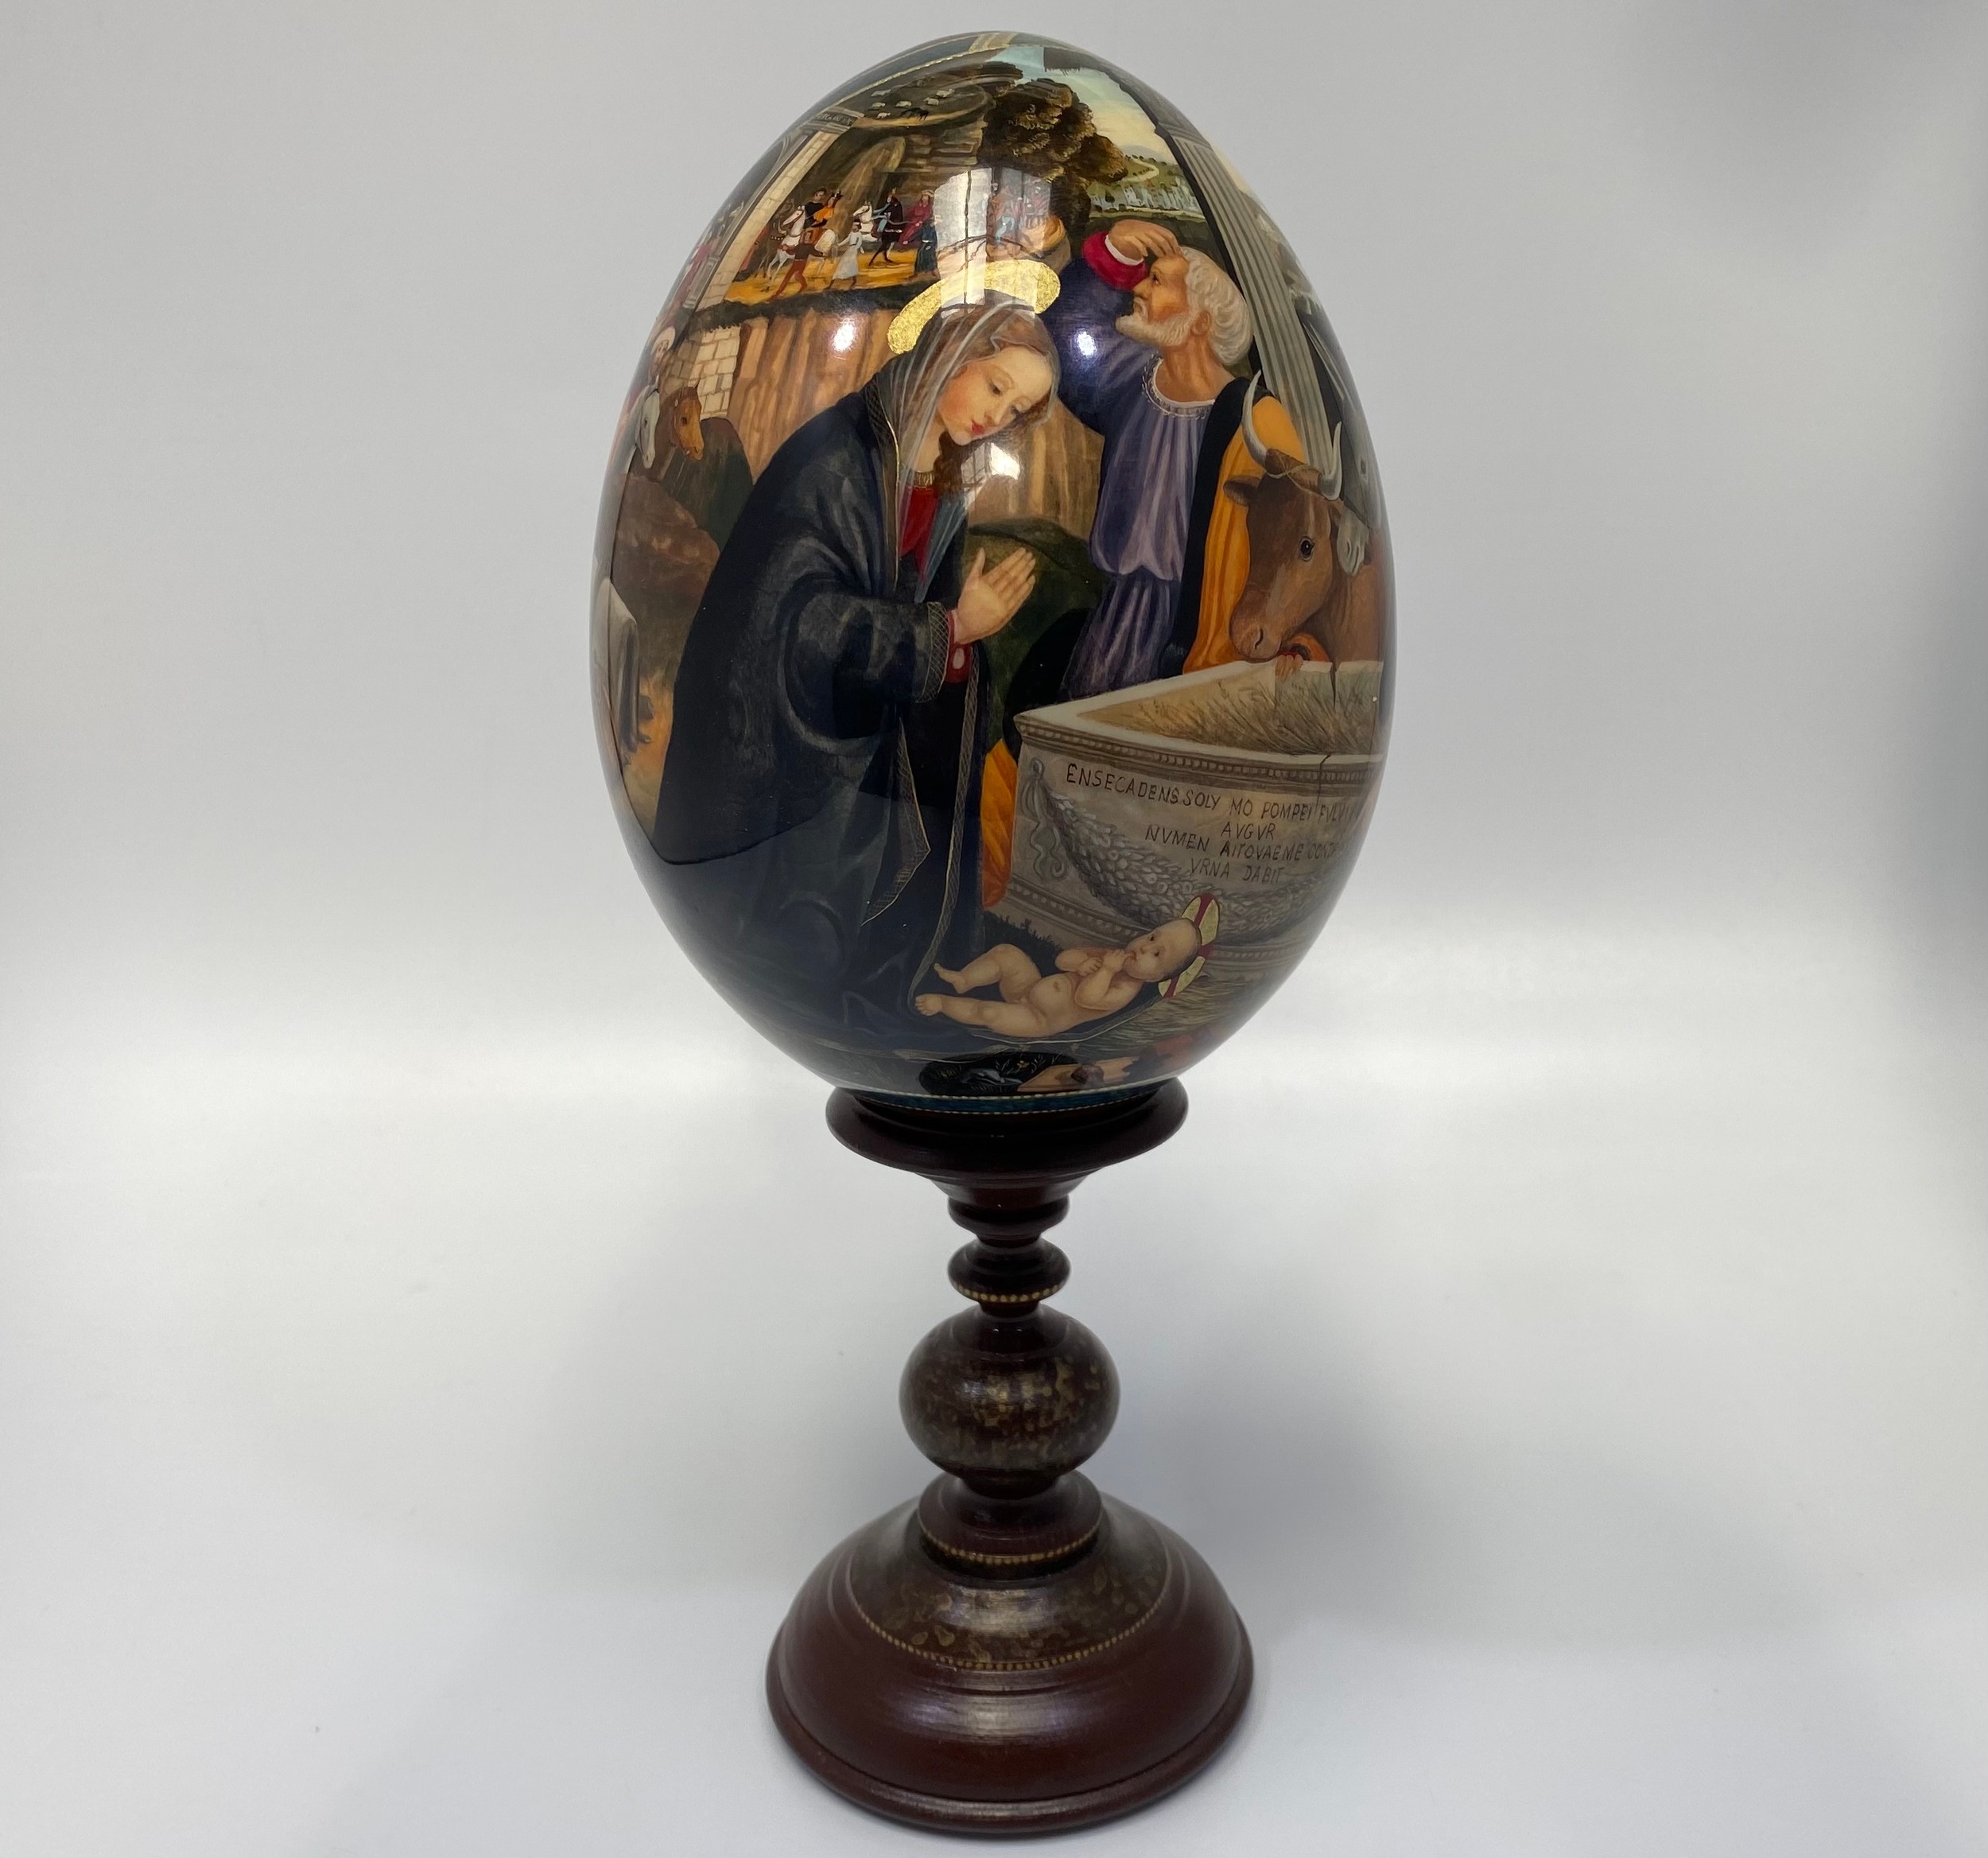 A St Petersburg hand-painted and laquered papier-mache egg depicting the Adoration of the Magi,